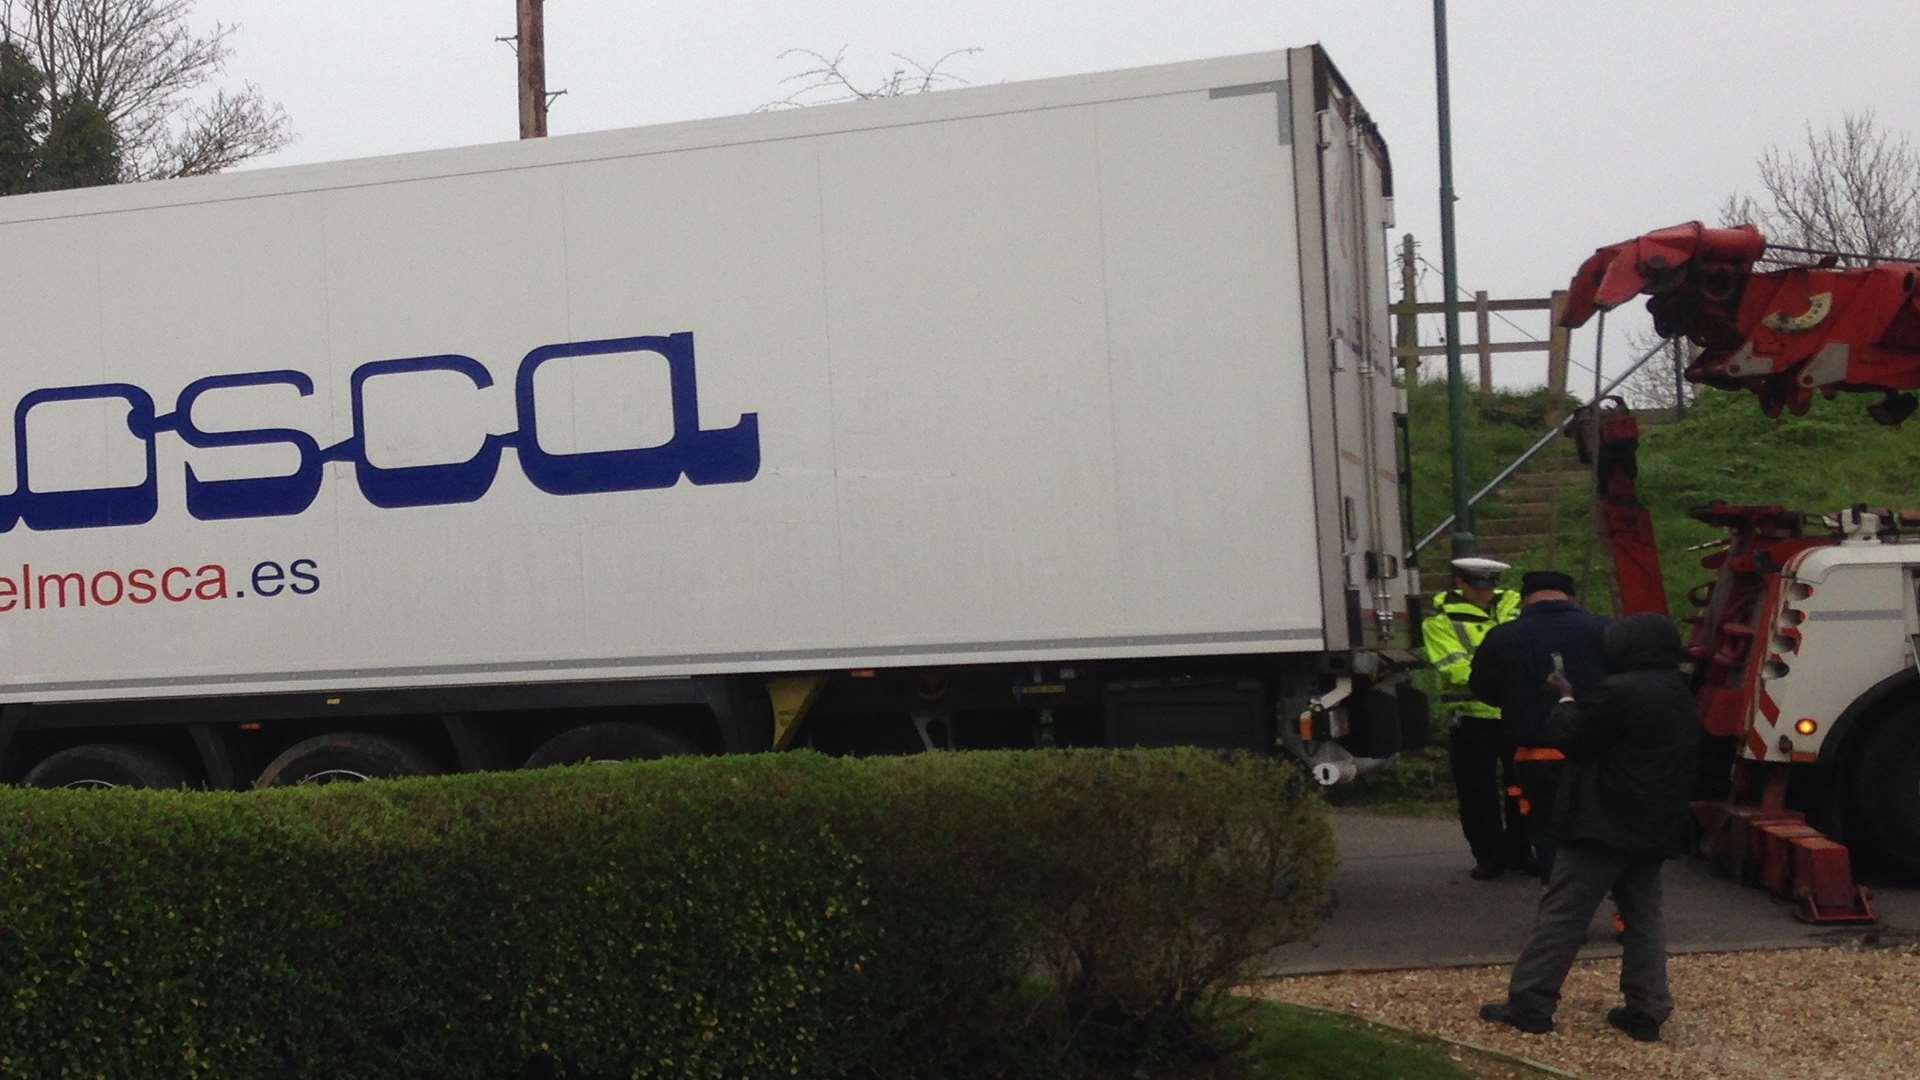 Police were called out after one lorry got stuck.